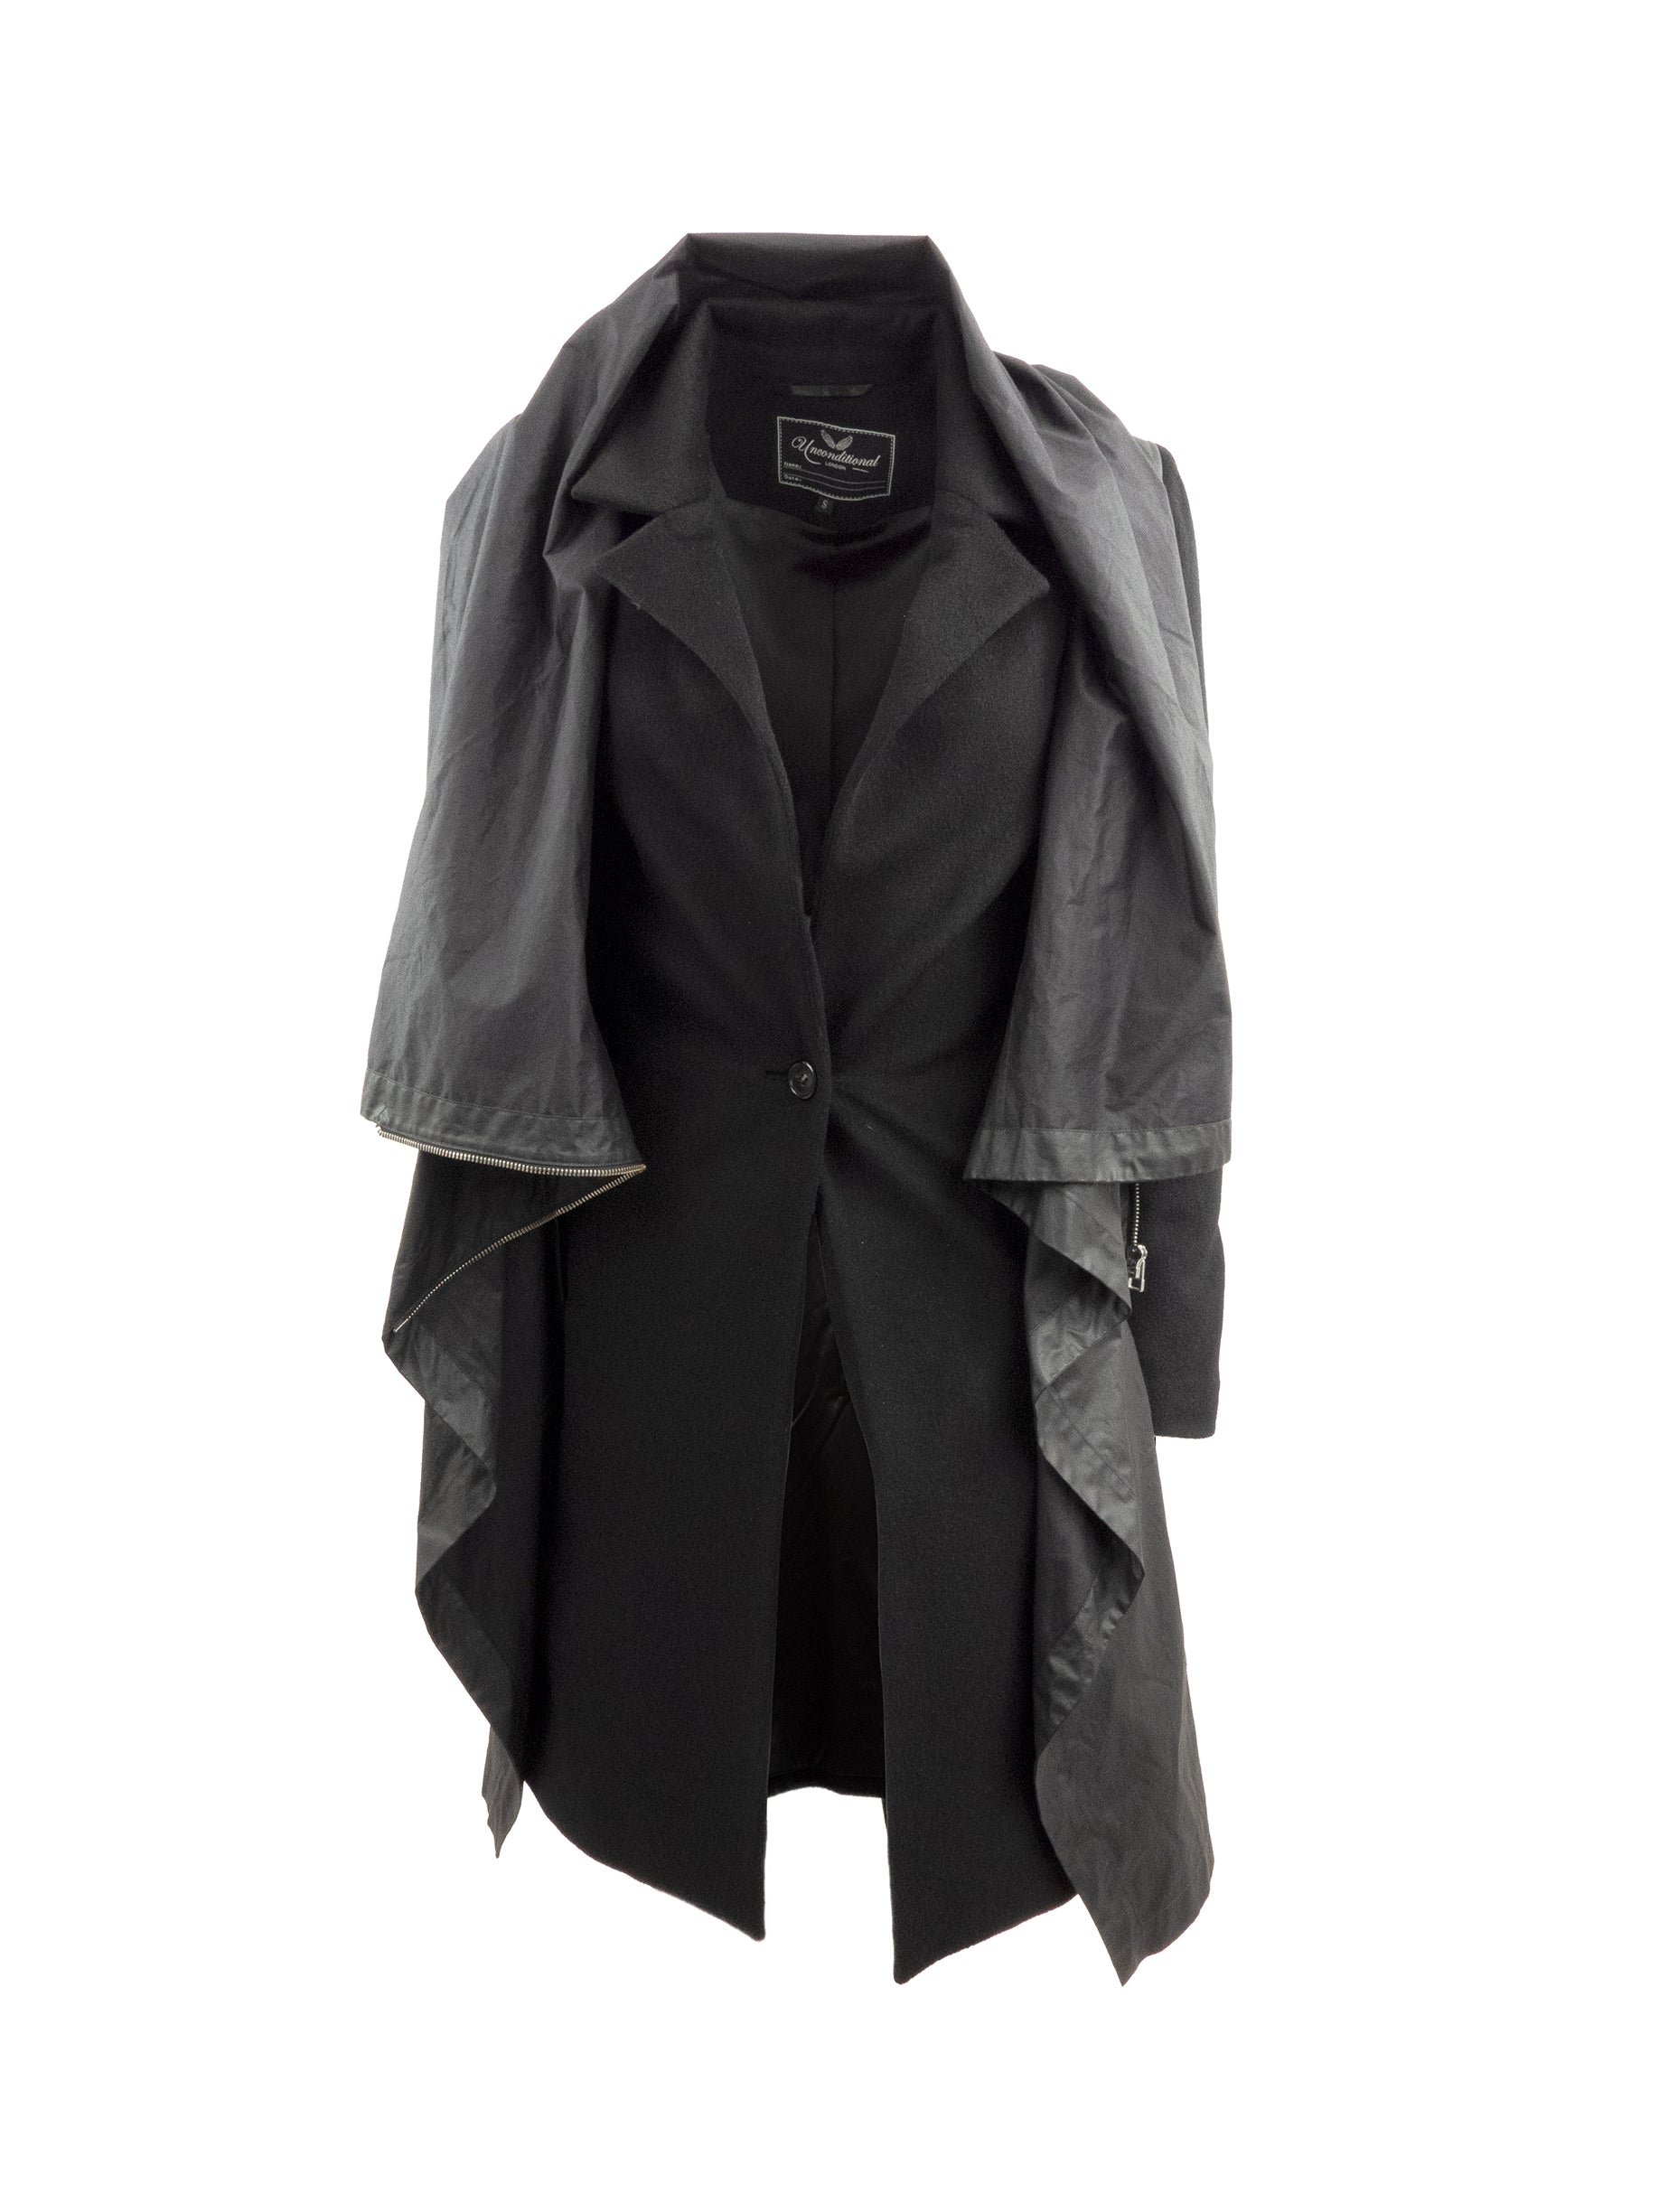 OVERSIZED WOOL OVERCOAT WITH RAIN COVER